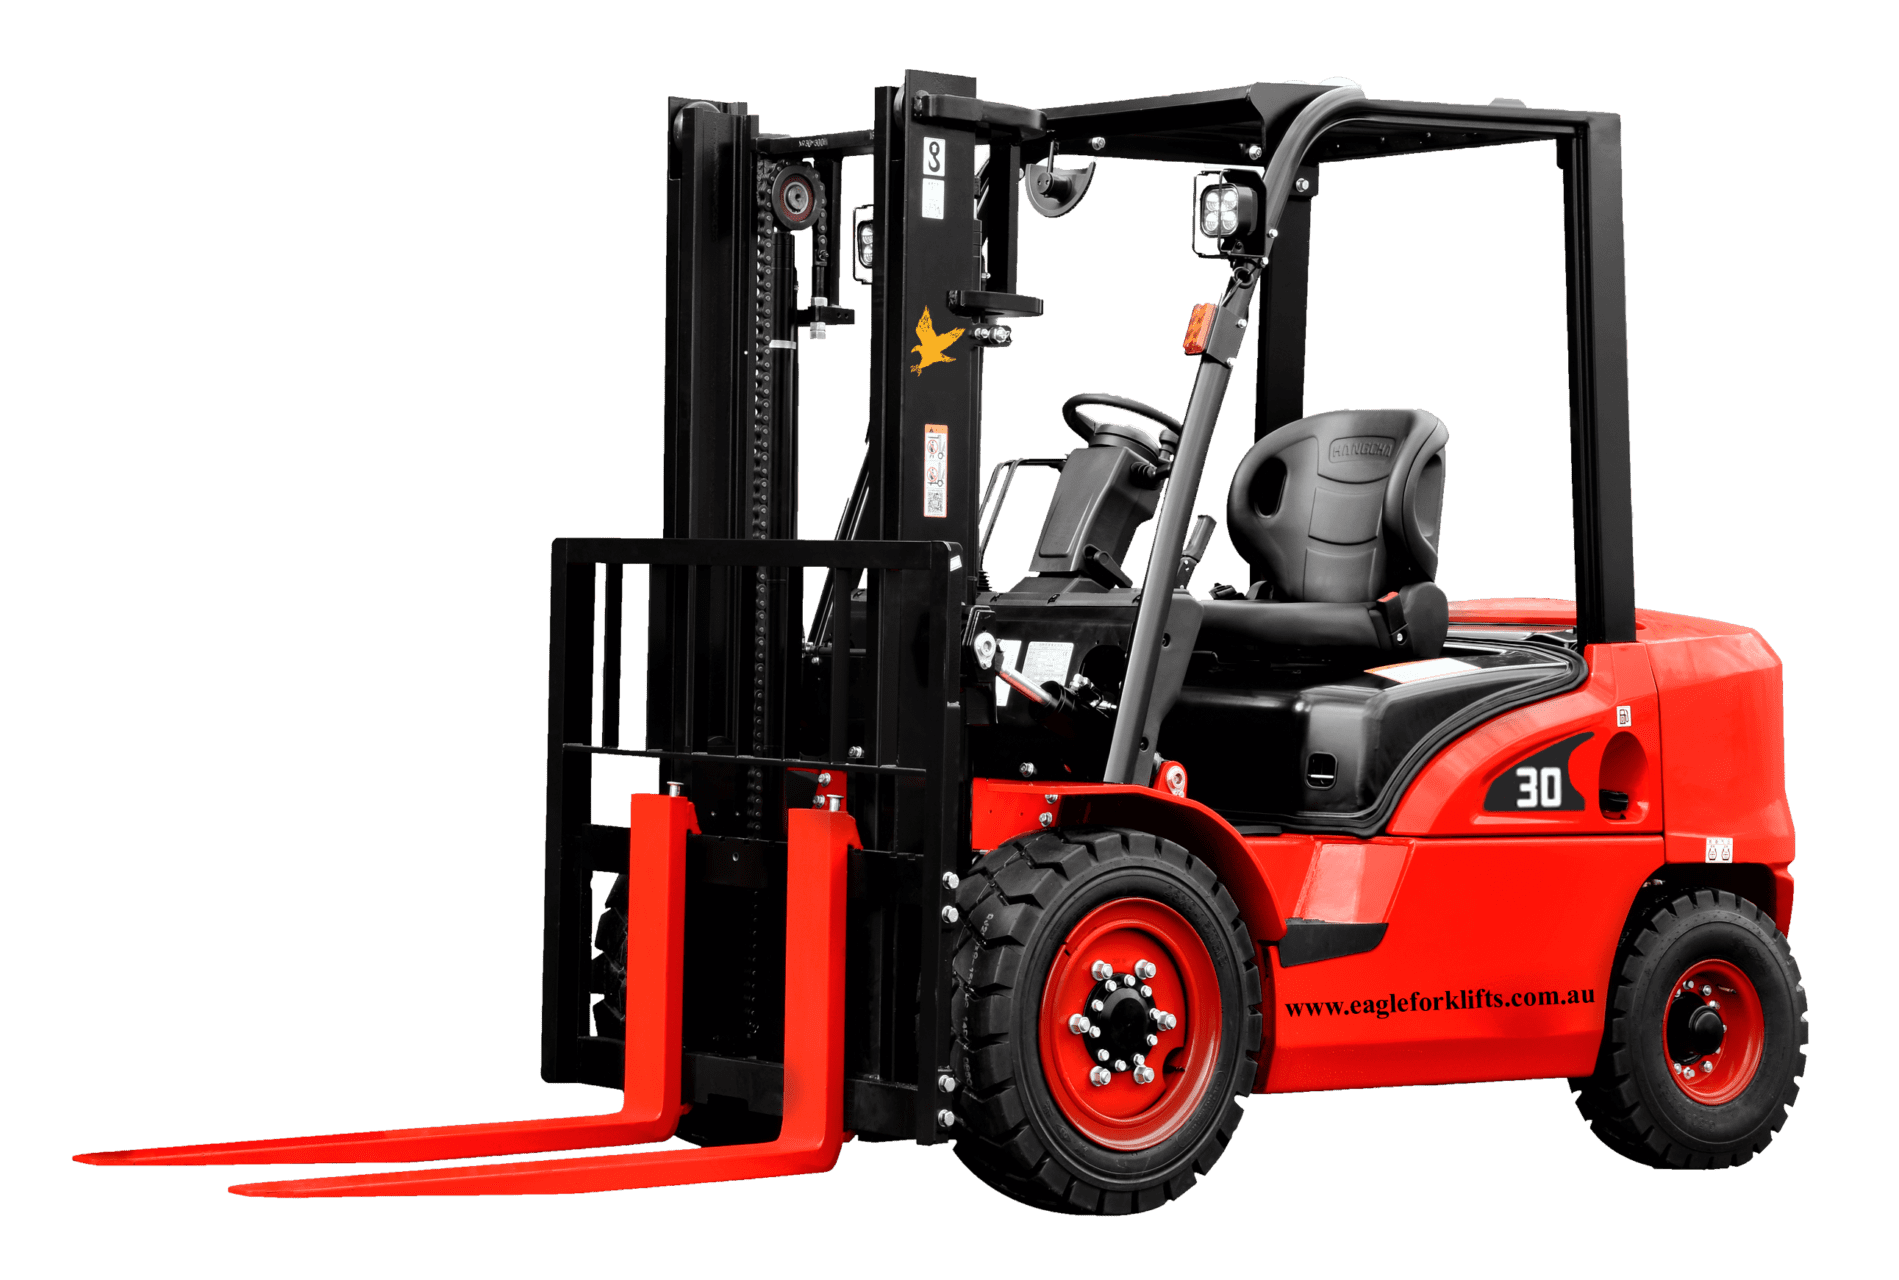 Forklifts for hire